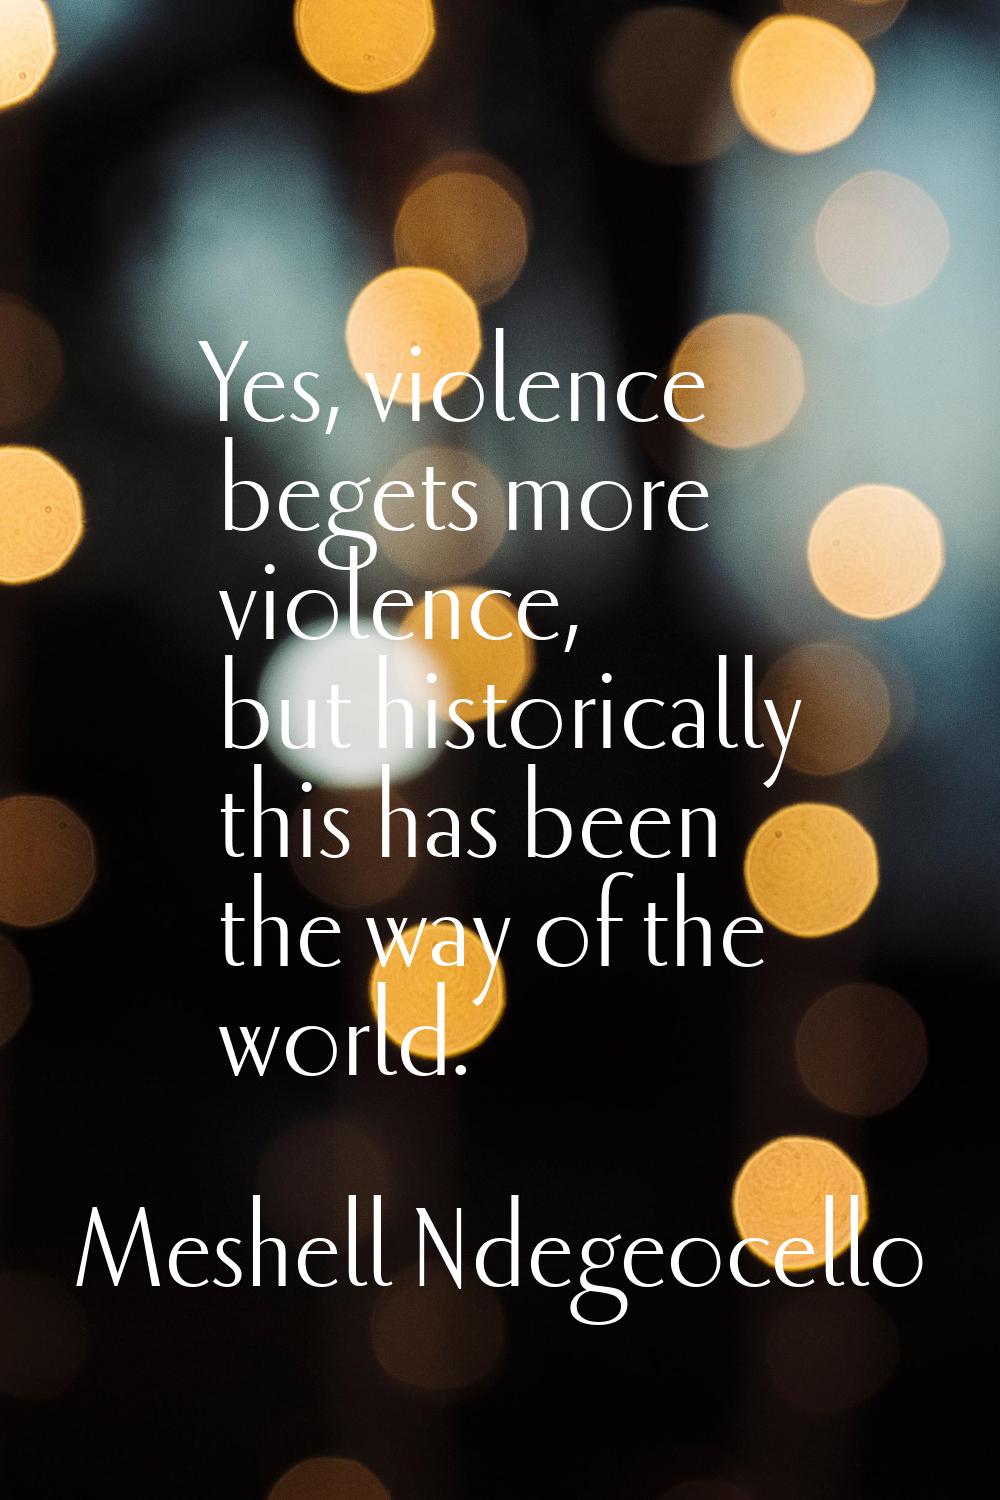 Yes, violence begets more violence, but historically this has been the way of the world.